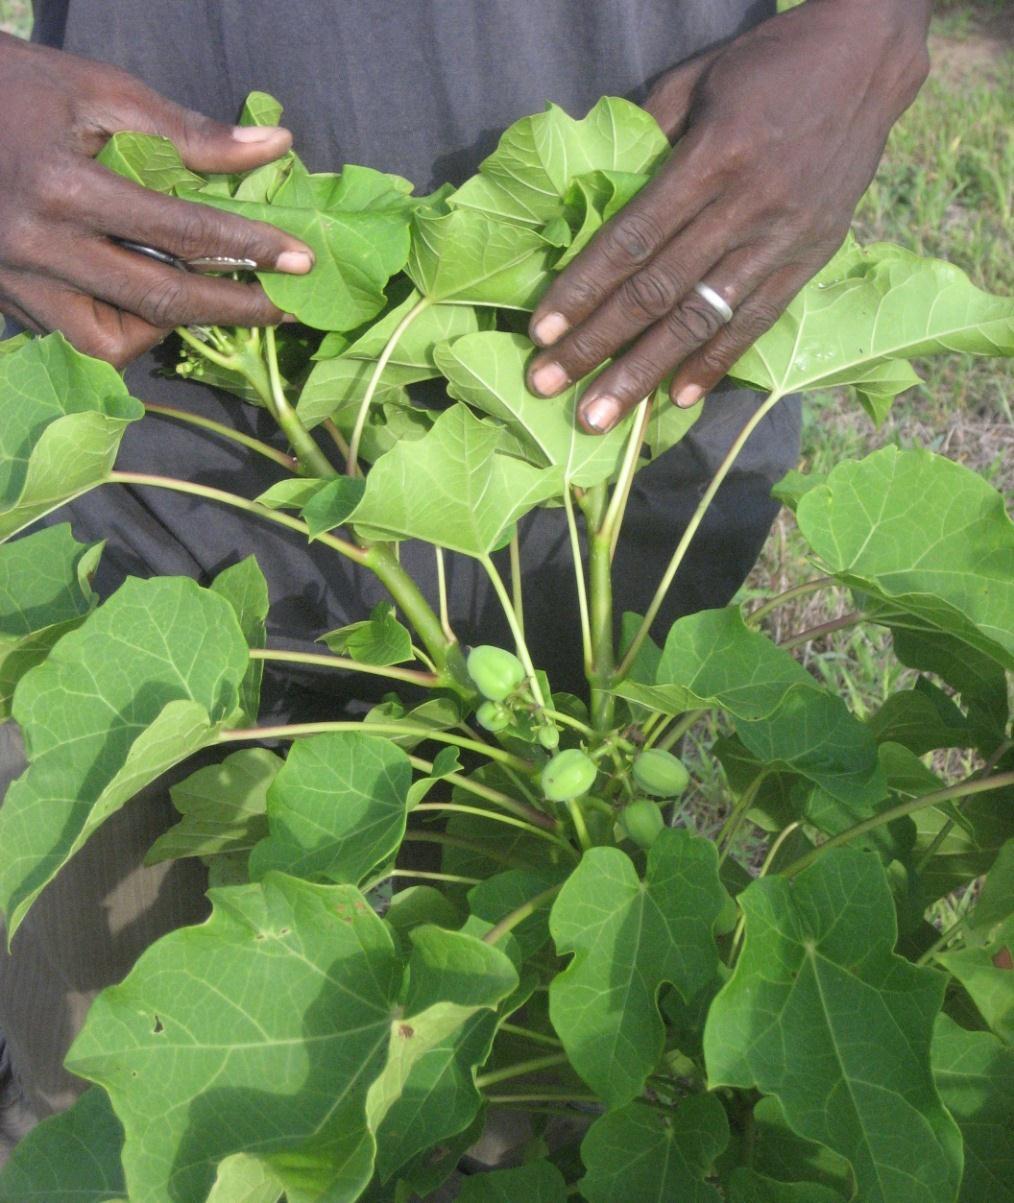 .Brief Description of JA Jatropha Africa is Ghanaian registered company. Started with outgrowers in 2005. Est. in Ghana as LLC in 2006 Biodiesel feedstock producer.